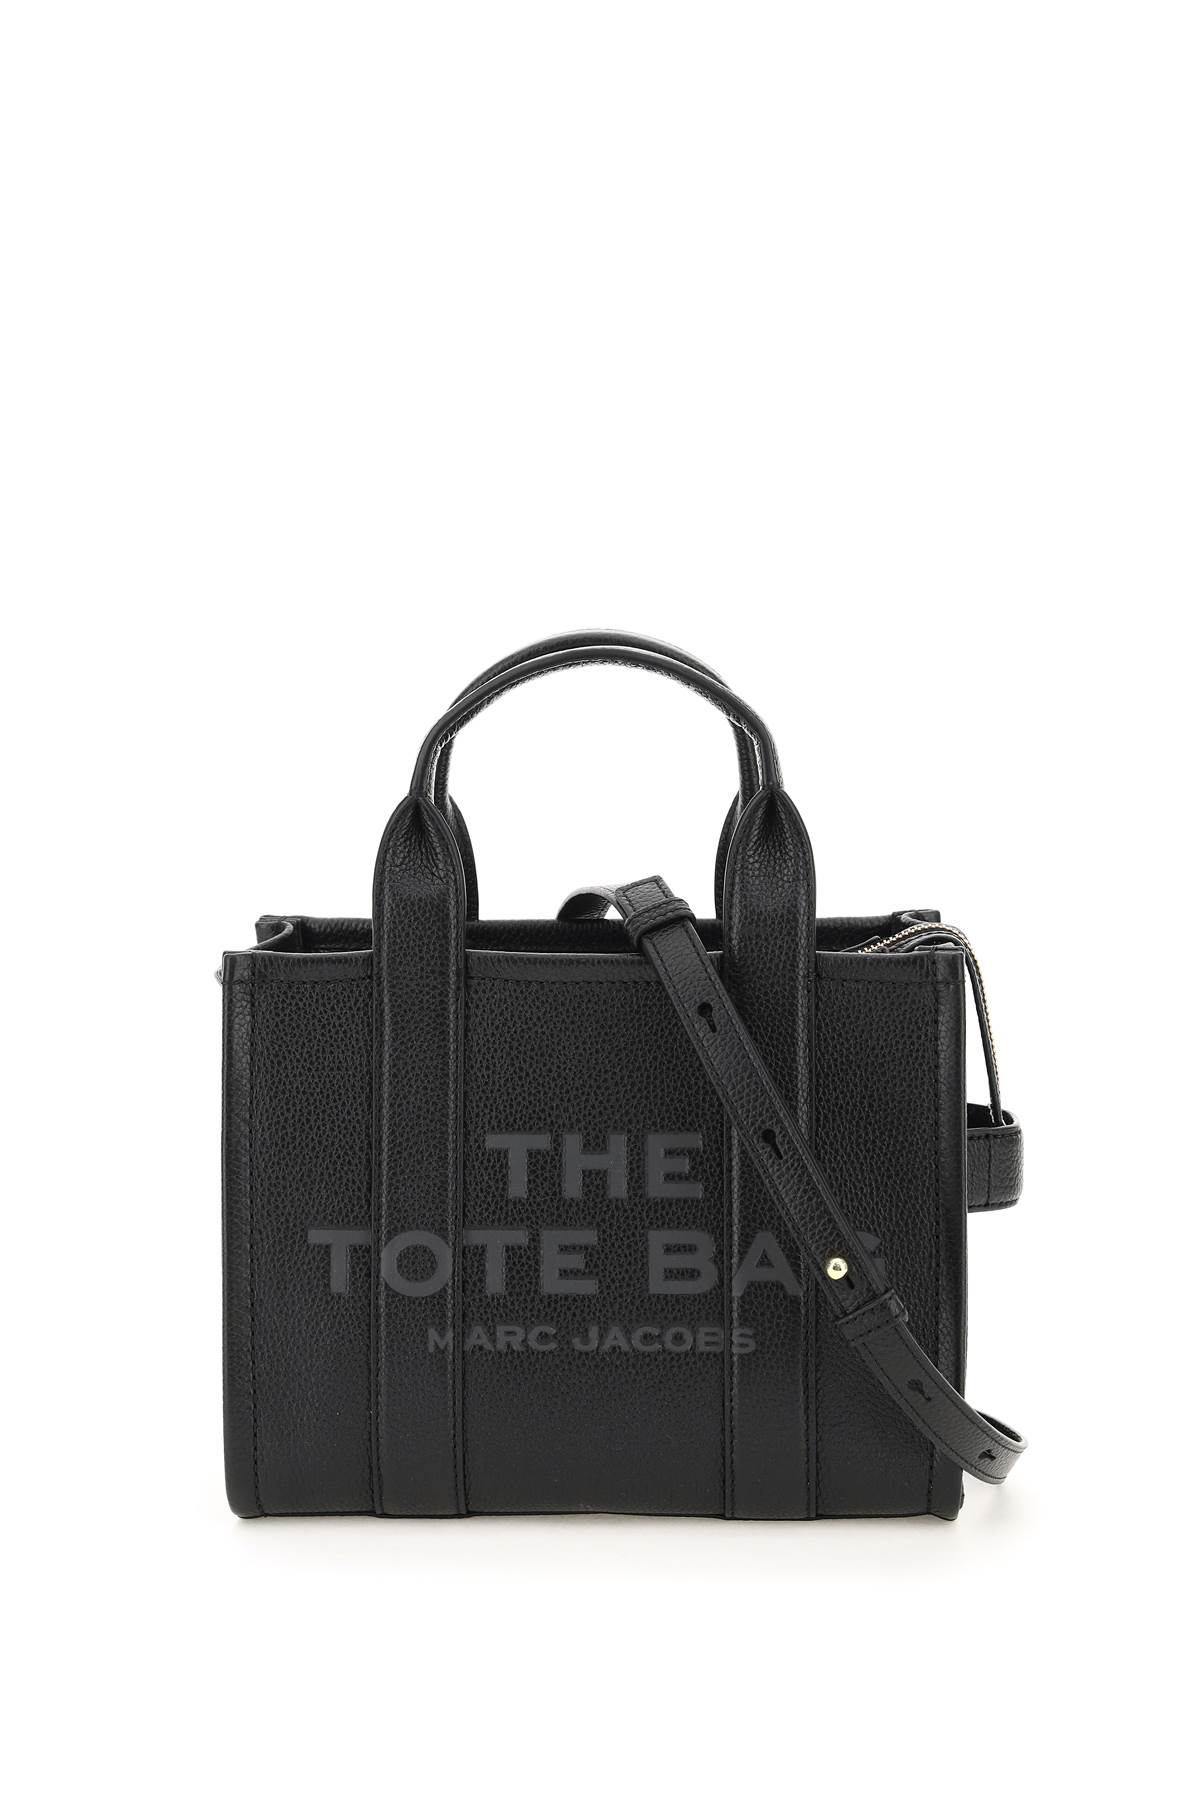 MARC JACOBS LEATHER THE MINI TRAVELER TOTE BAG